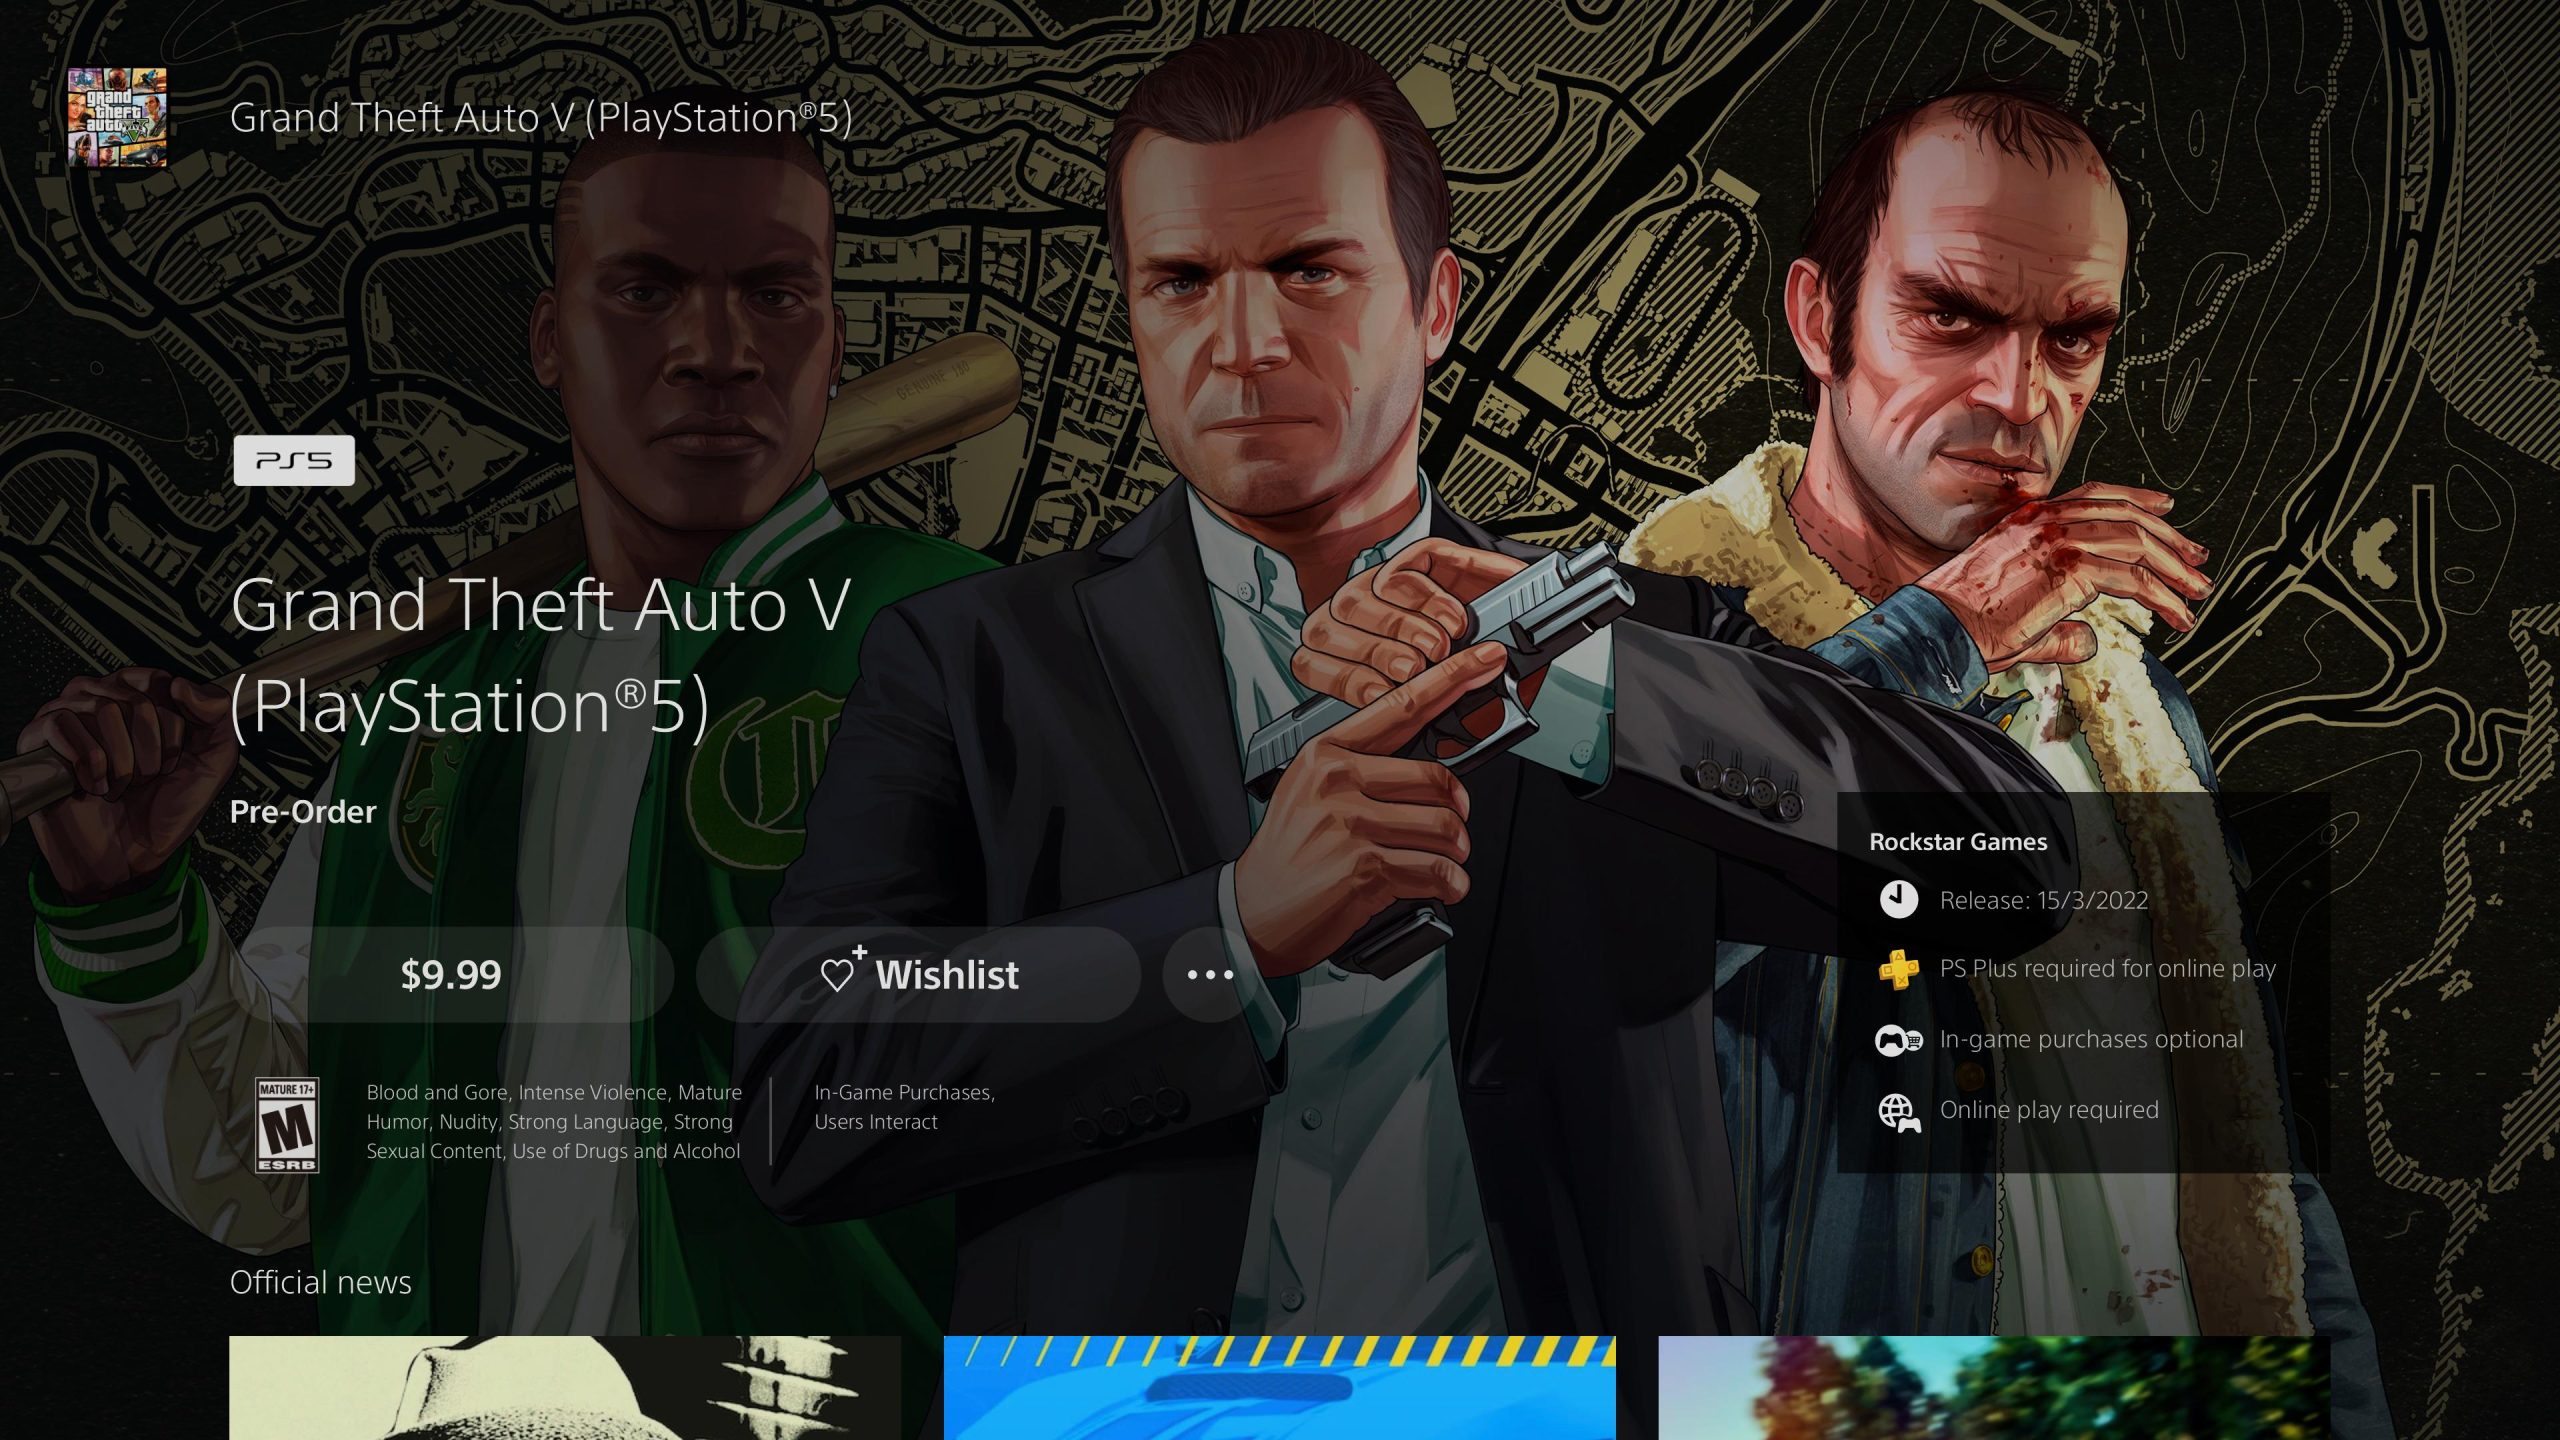 Grand Theft Auto 5 - PS5 listing